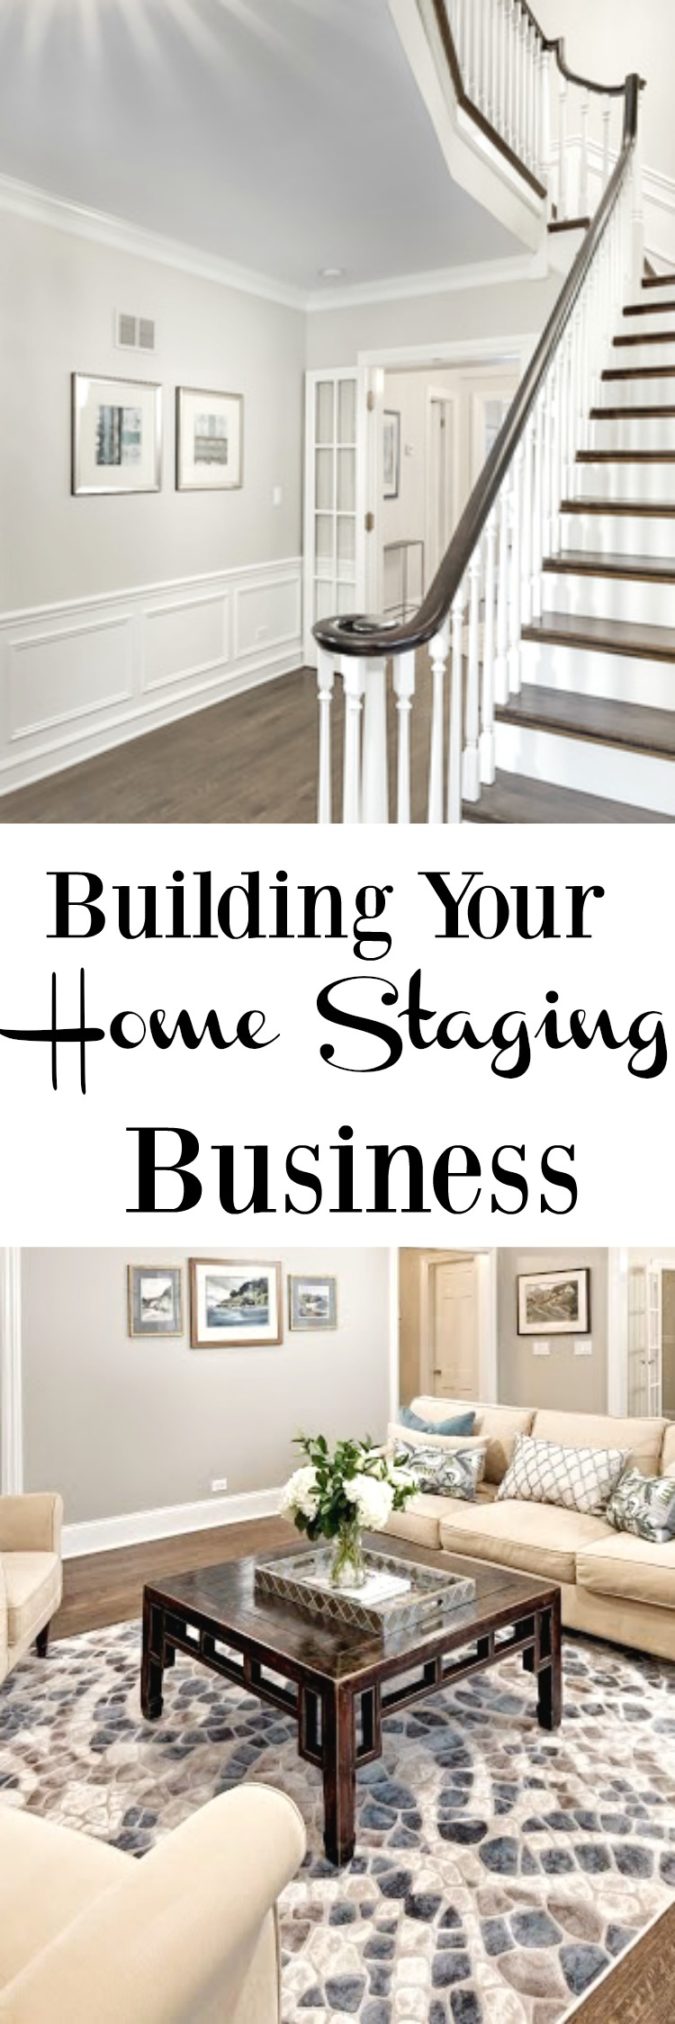 Home Staging Tips and how to build your home staging business more at www.homewithkeki.com #homestaging #stagingtips